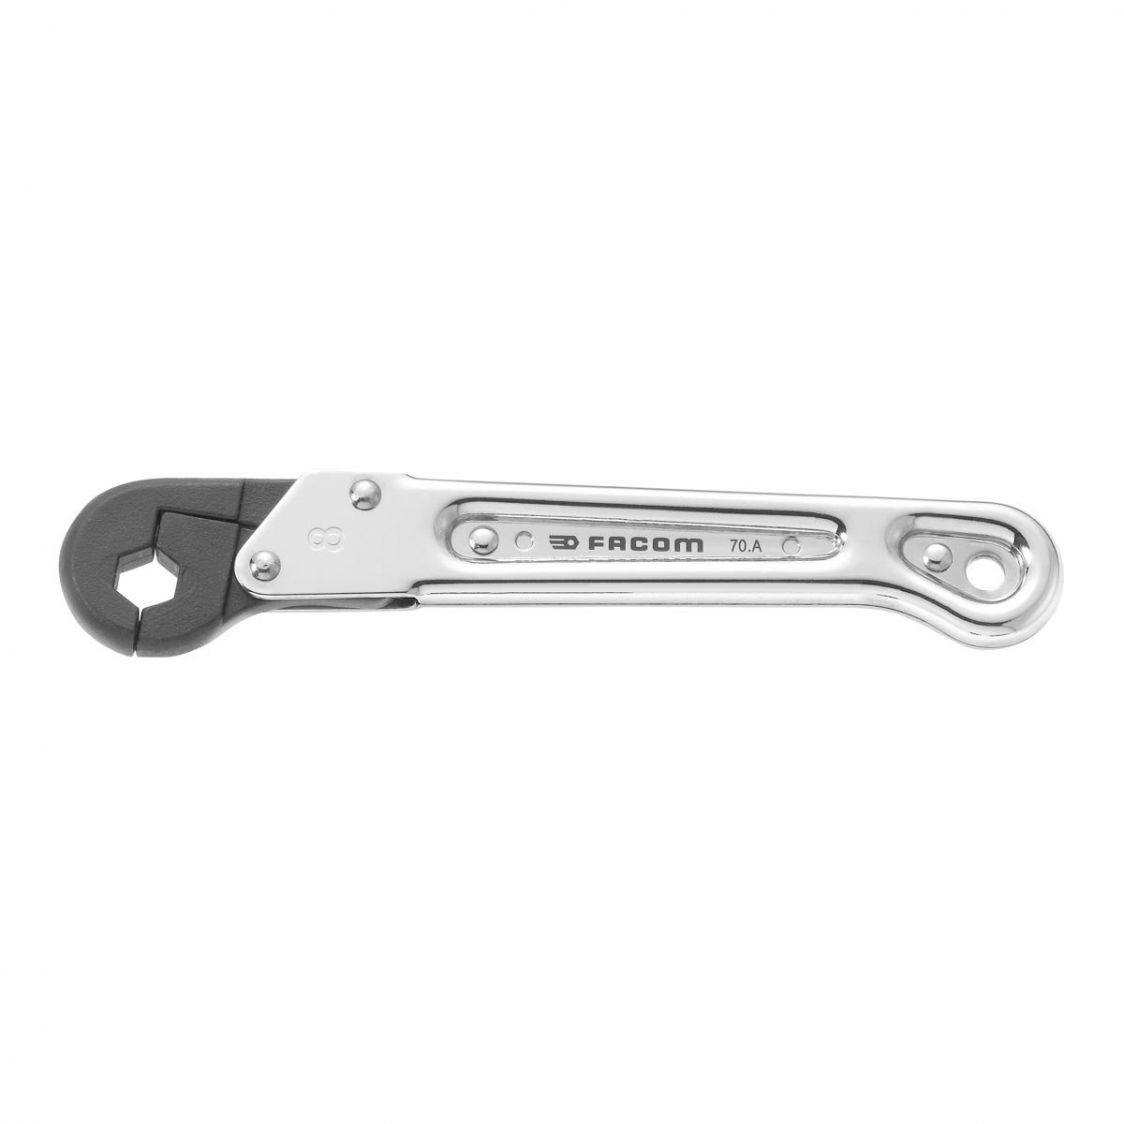 FACOM 70A.13 - 13mm Metric Ratchet Flare Nut Spanner